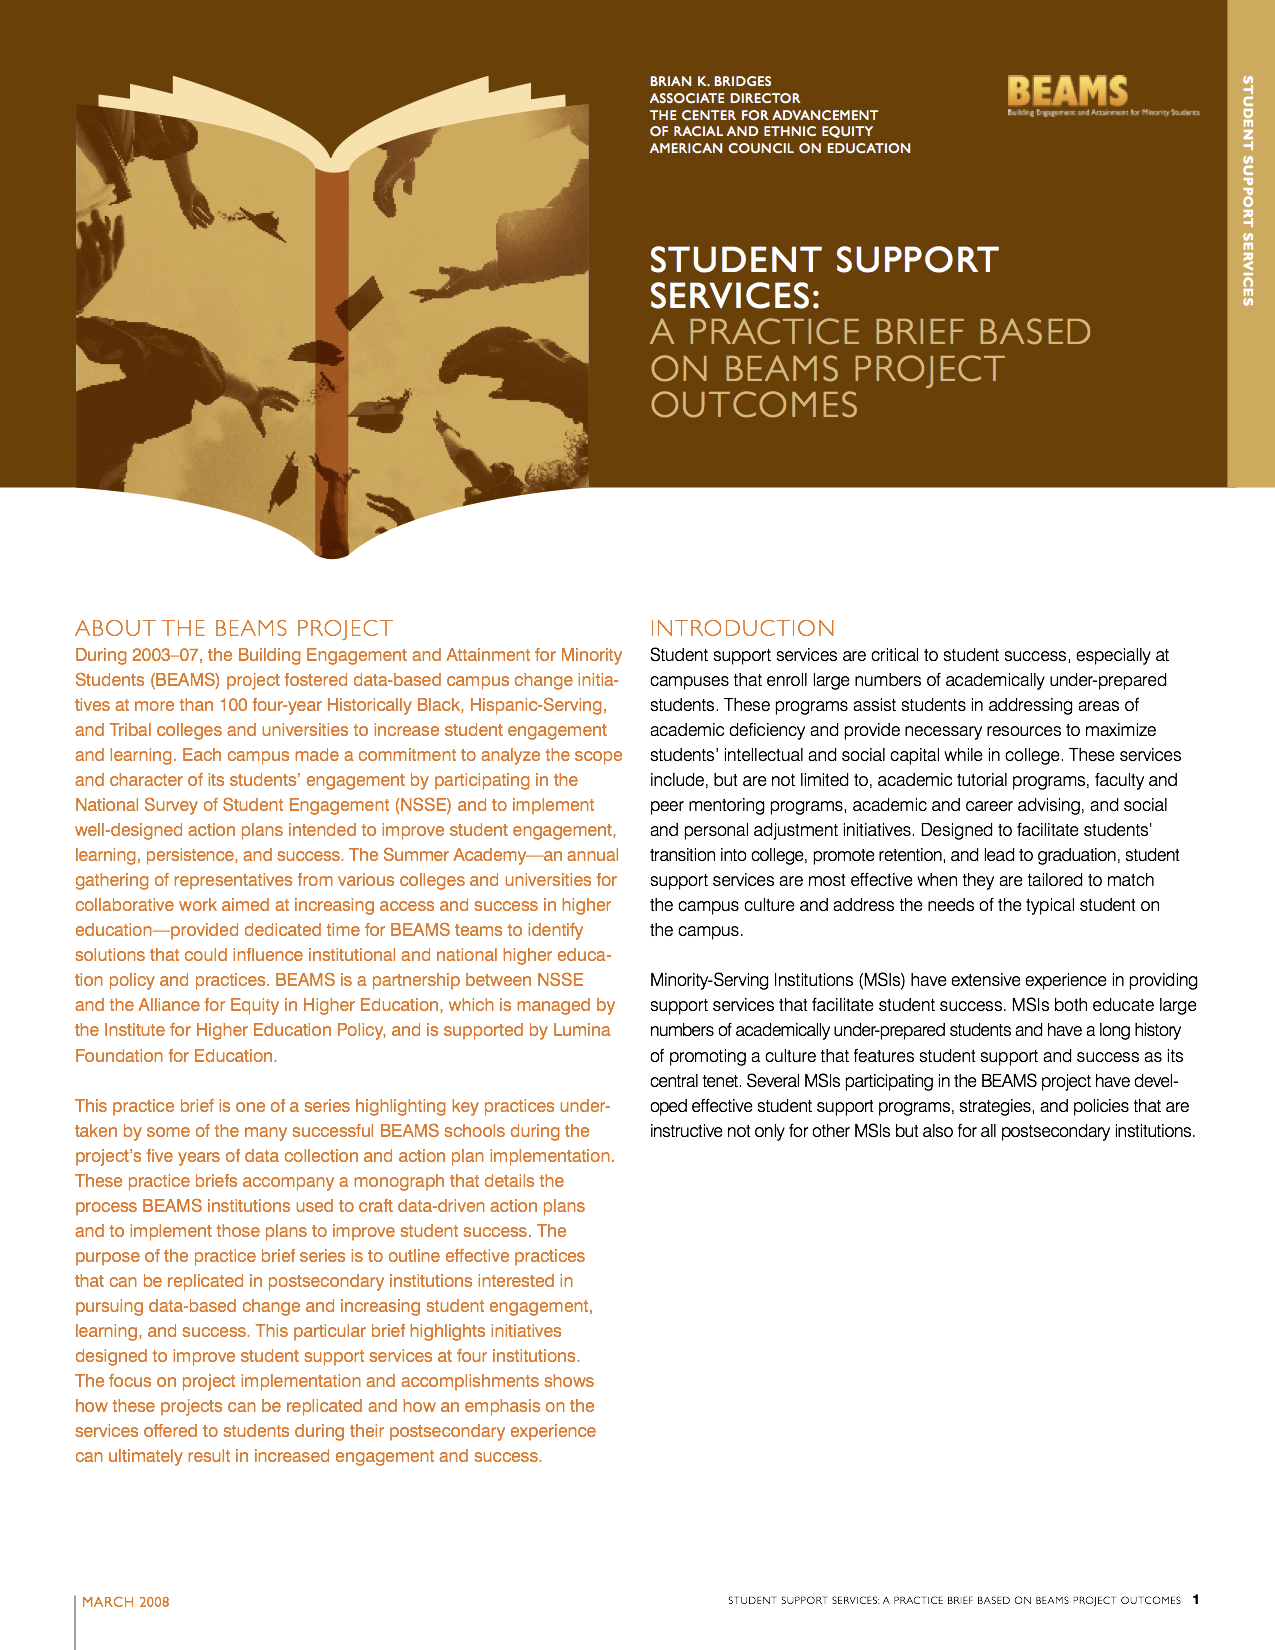 Student Support Services: A Practice Brief Based on BEAMS Project Outcomes